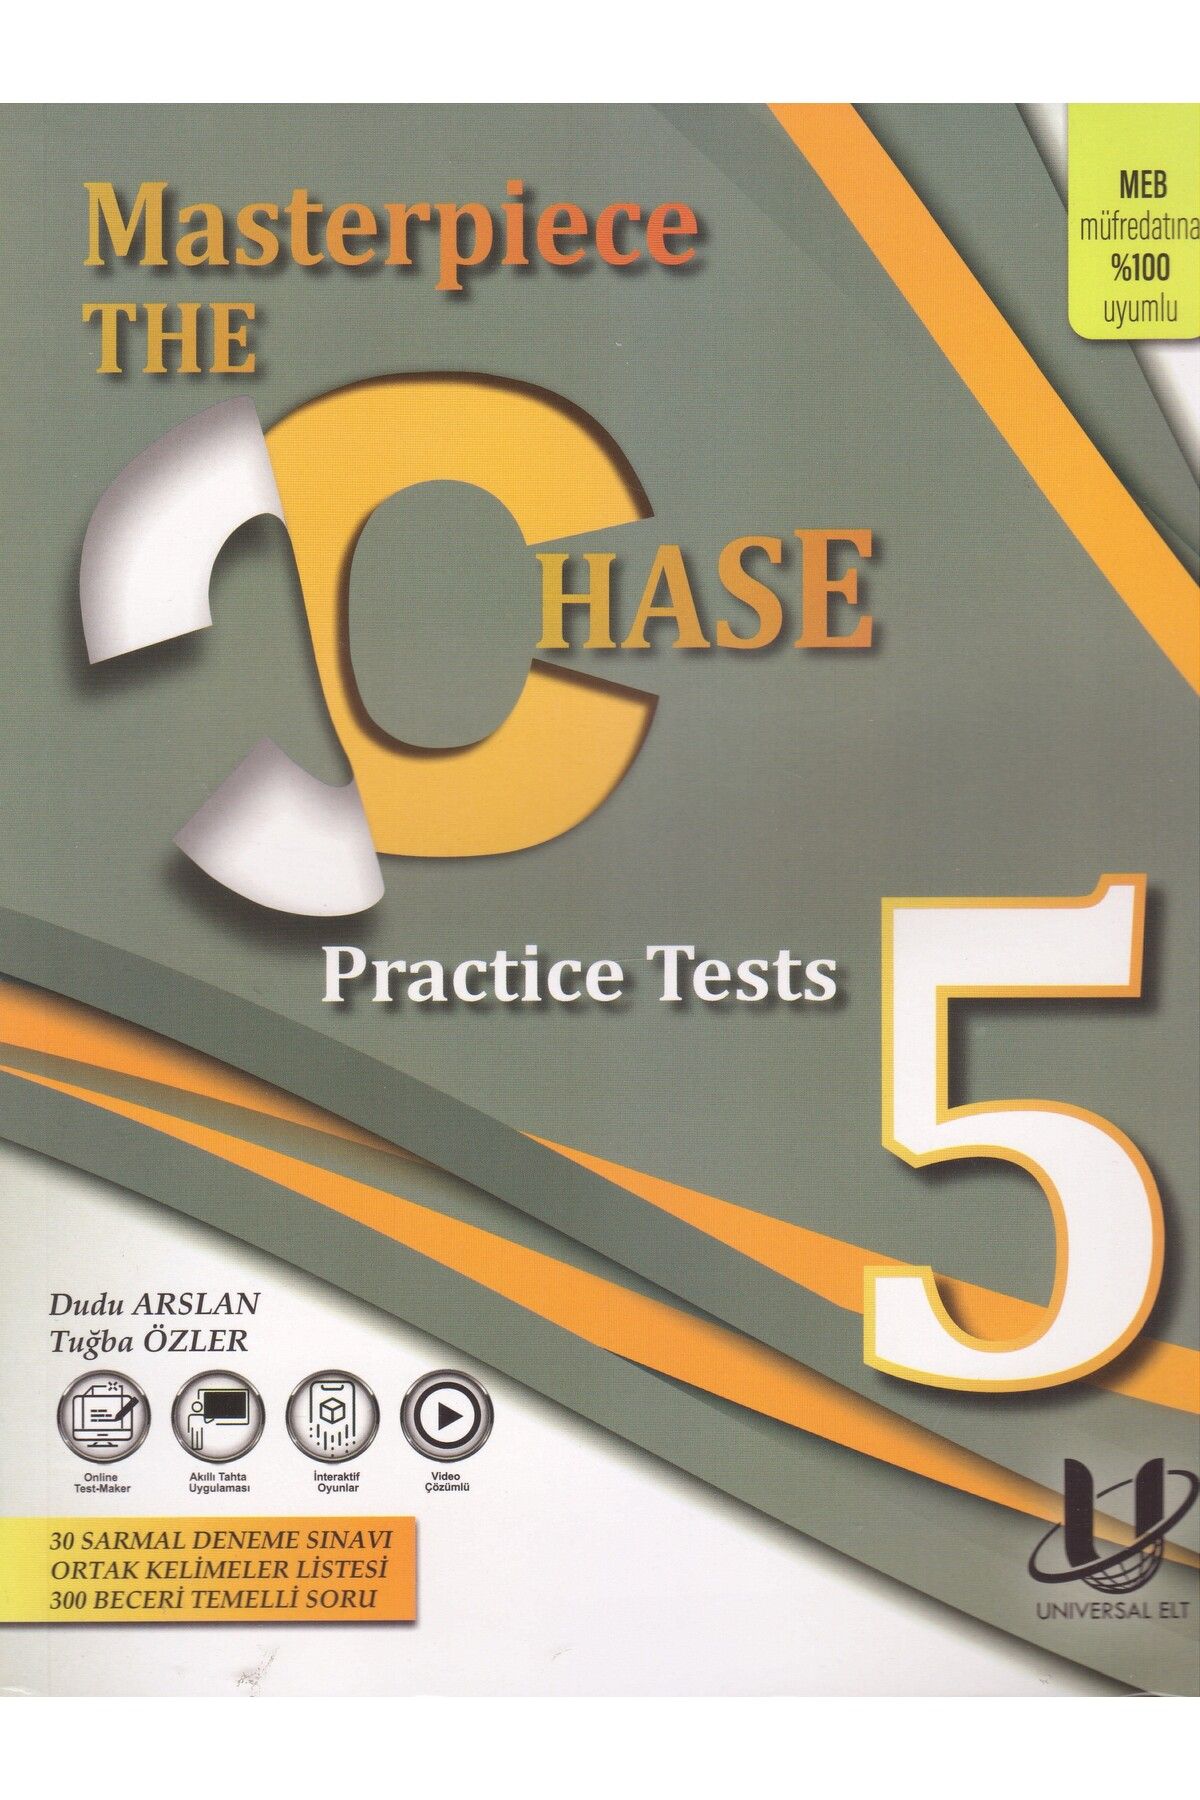 Universal The Chase 5 Masterpiece Practice Tests